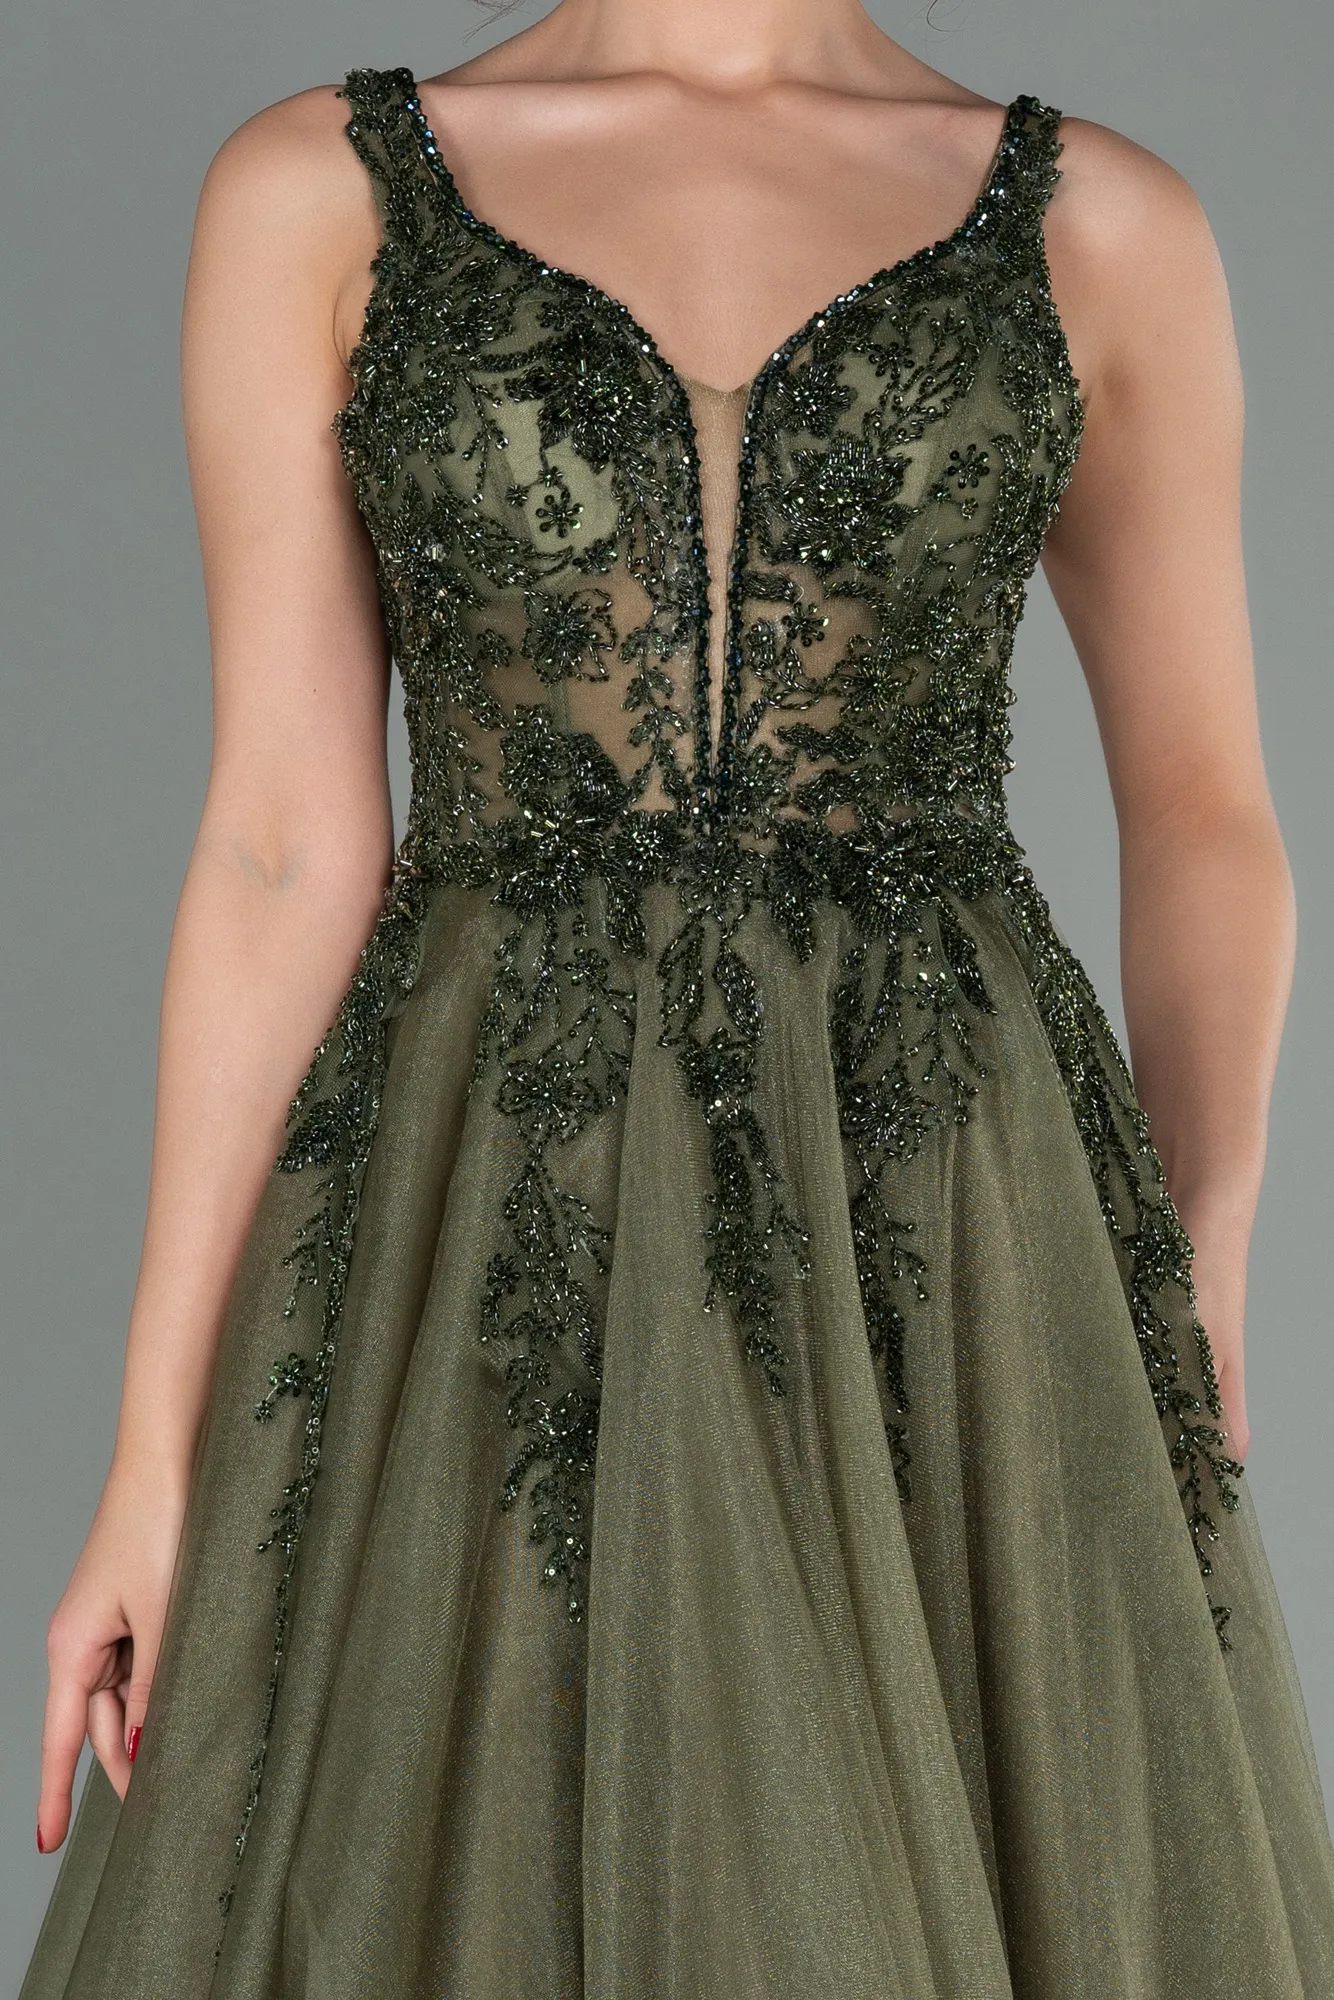 Olive Drab-Long Haute Couture ABU2788